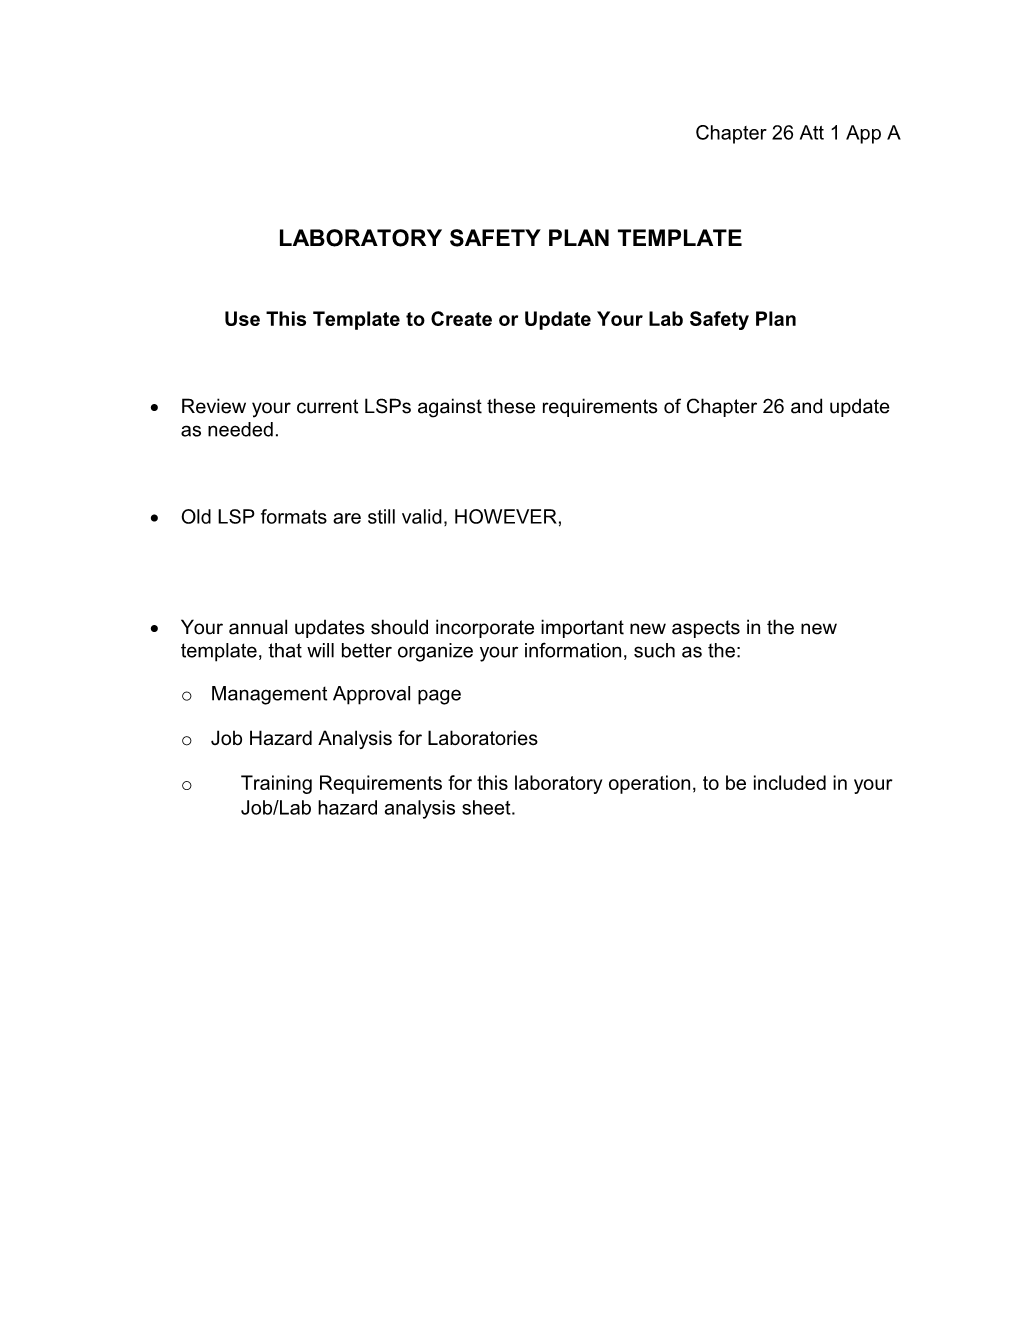 Use This Template to Create Or Update Your Lab Safety Plan